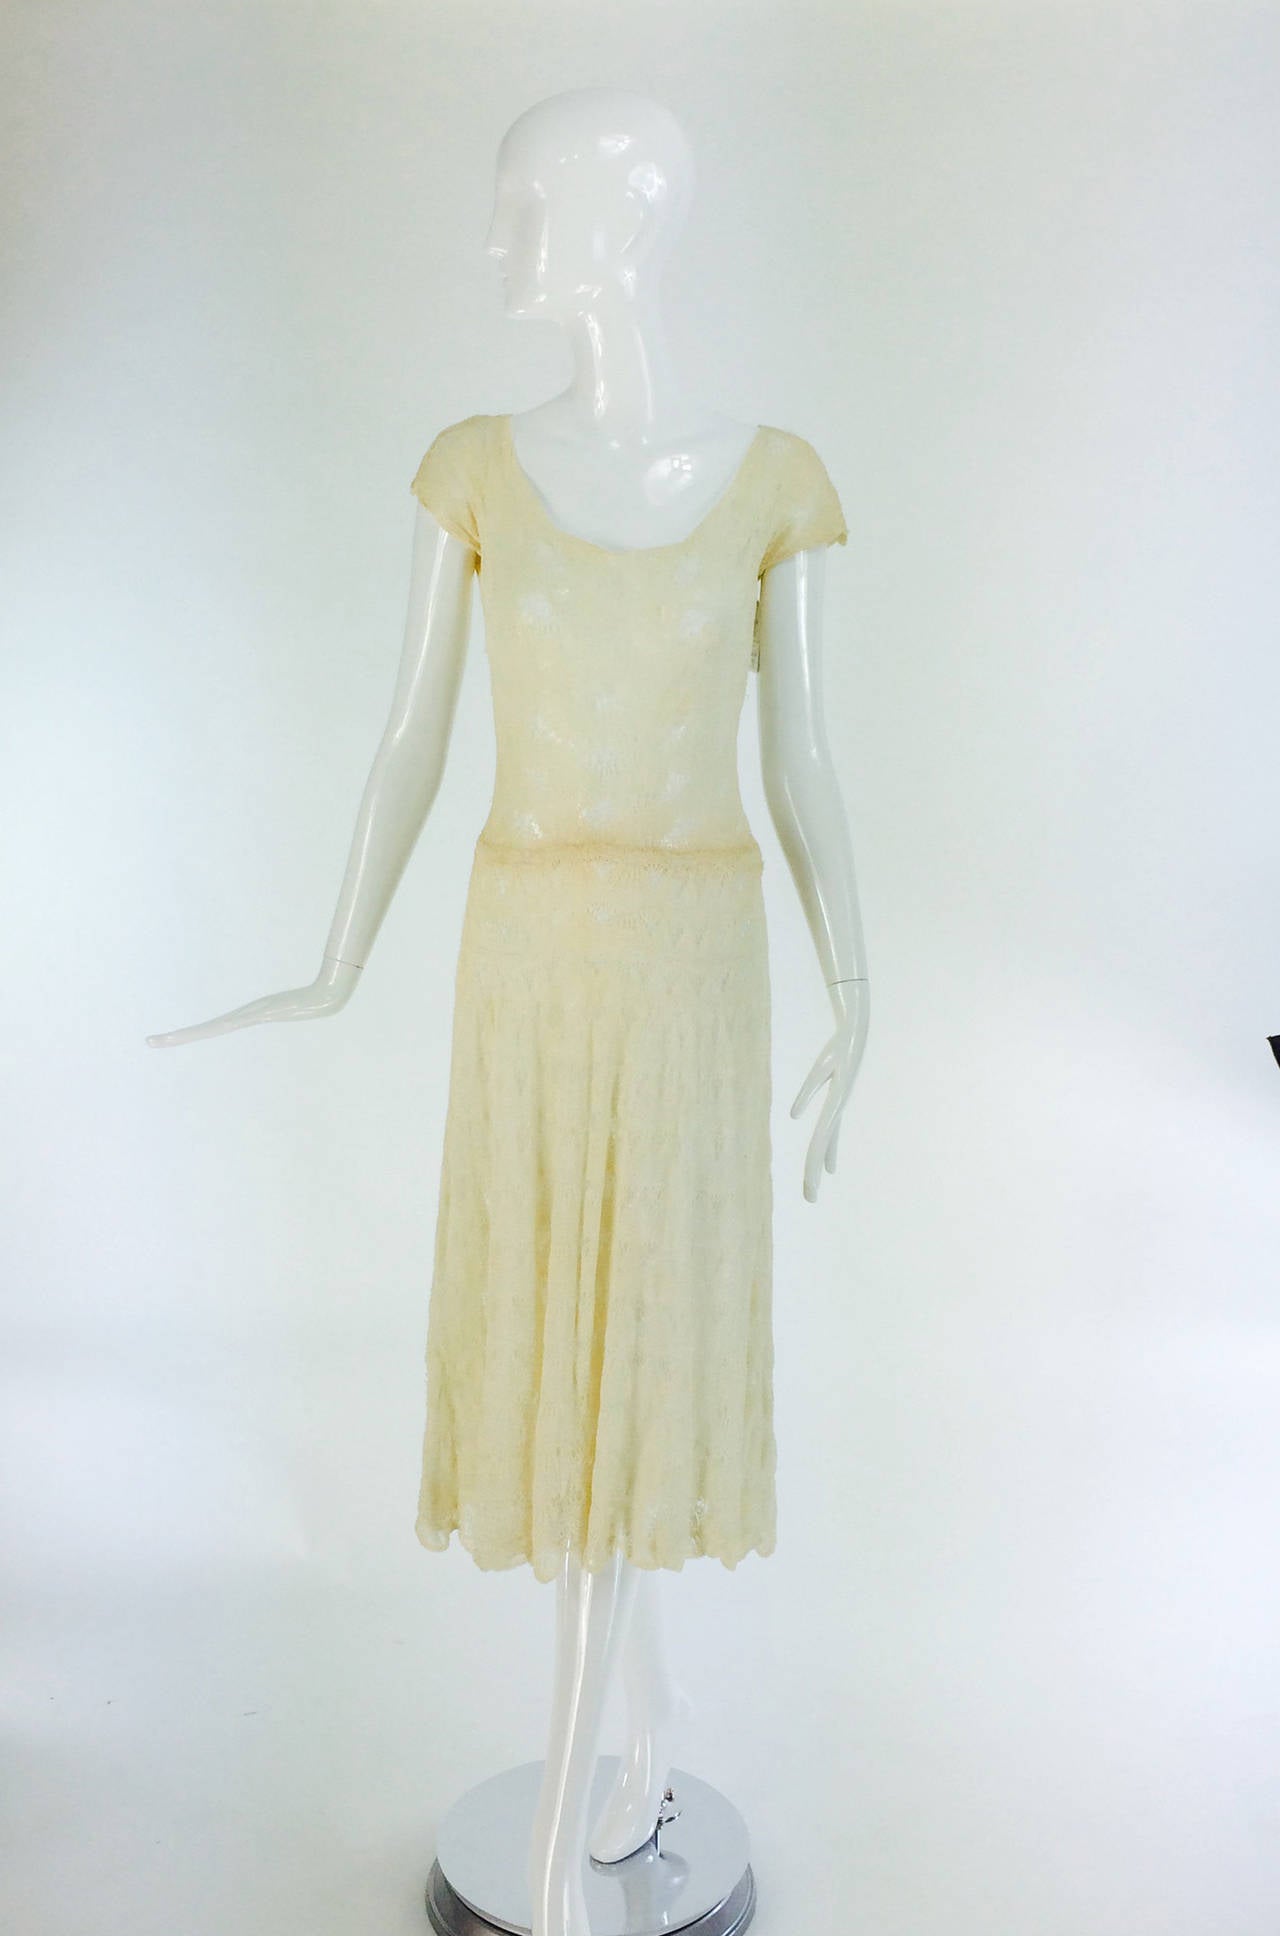 Ivory cotton crochet dress from the 1930s, labeled Aida Woolf, 20 Grosvenor St, Mayfair London W1...Aida Woolf designs can be found in the collection of the  Victoria & Albert museum London...From the 1930s a beautiful hand crocheted day